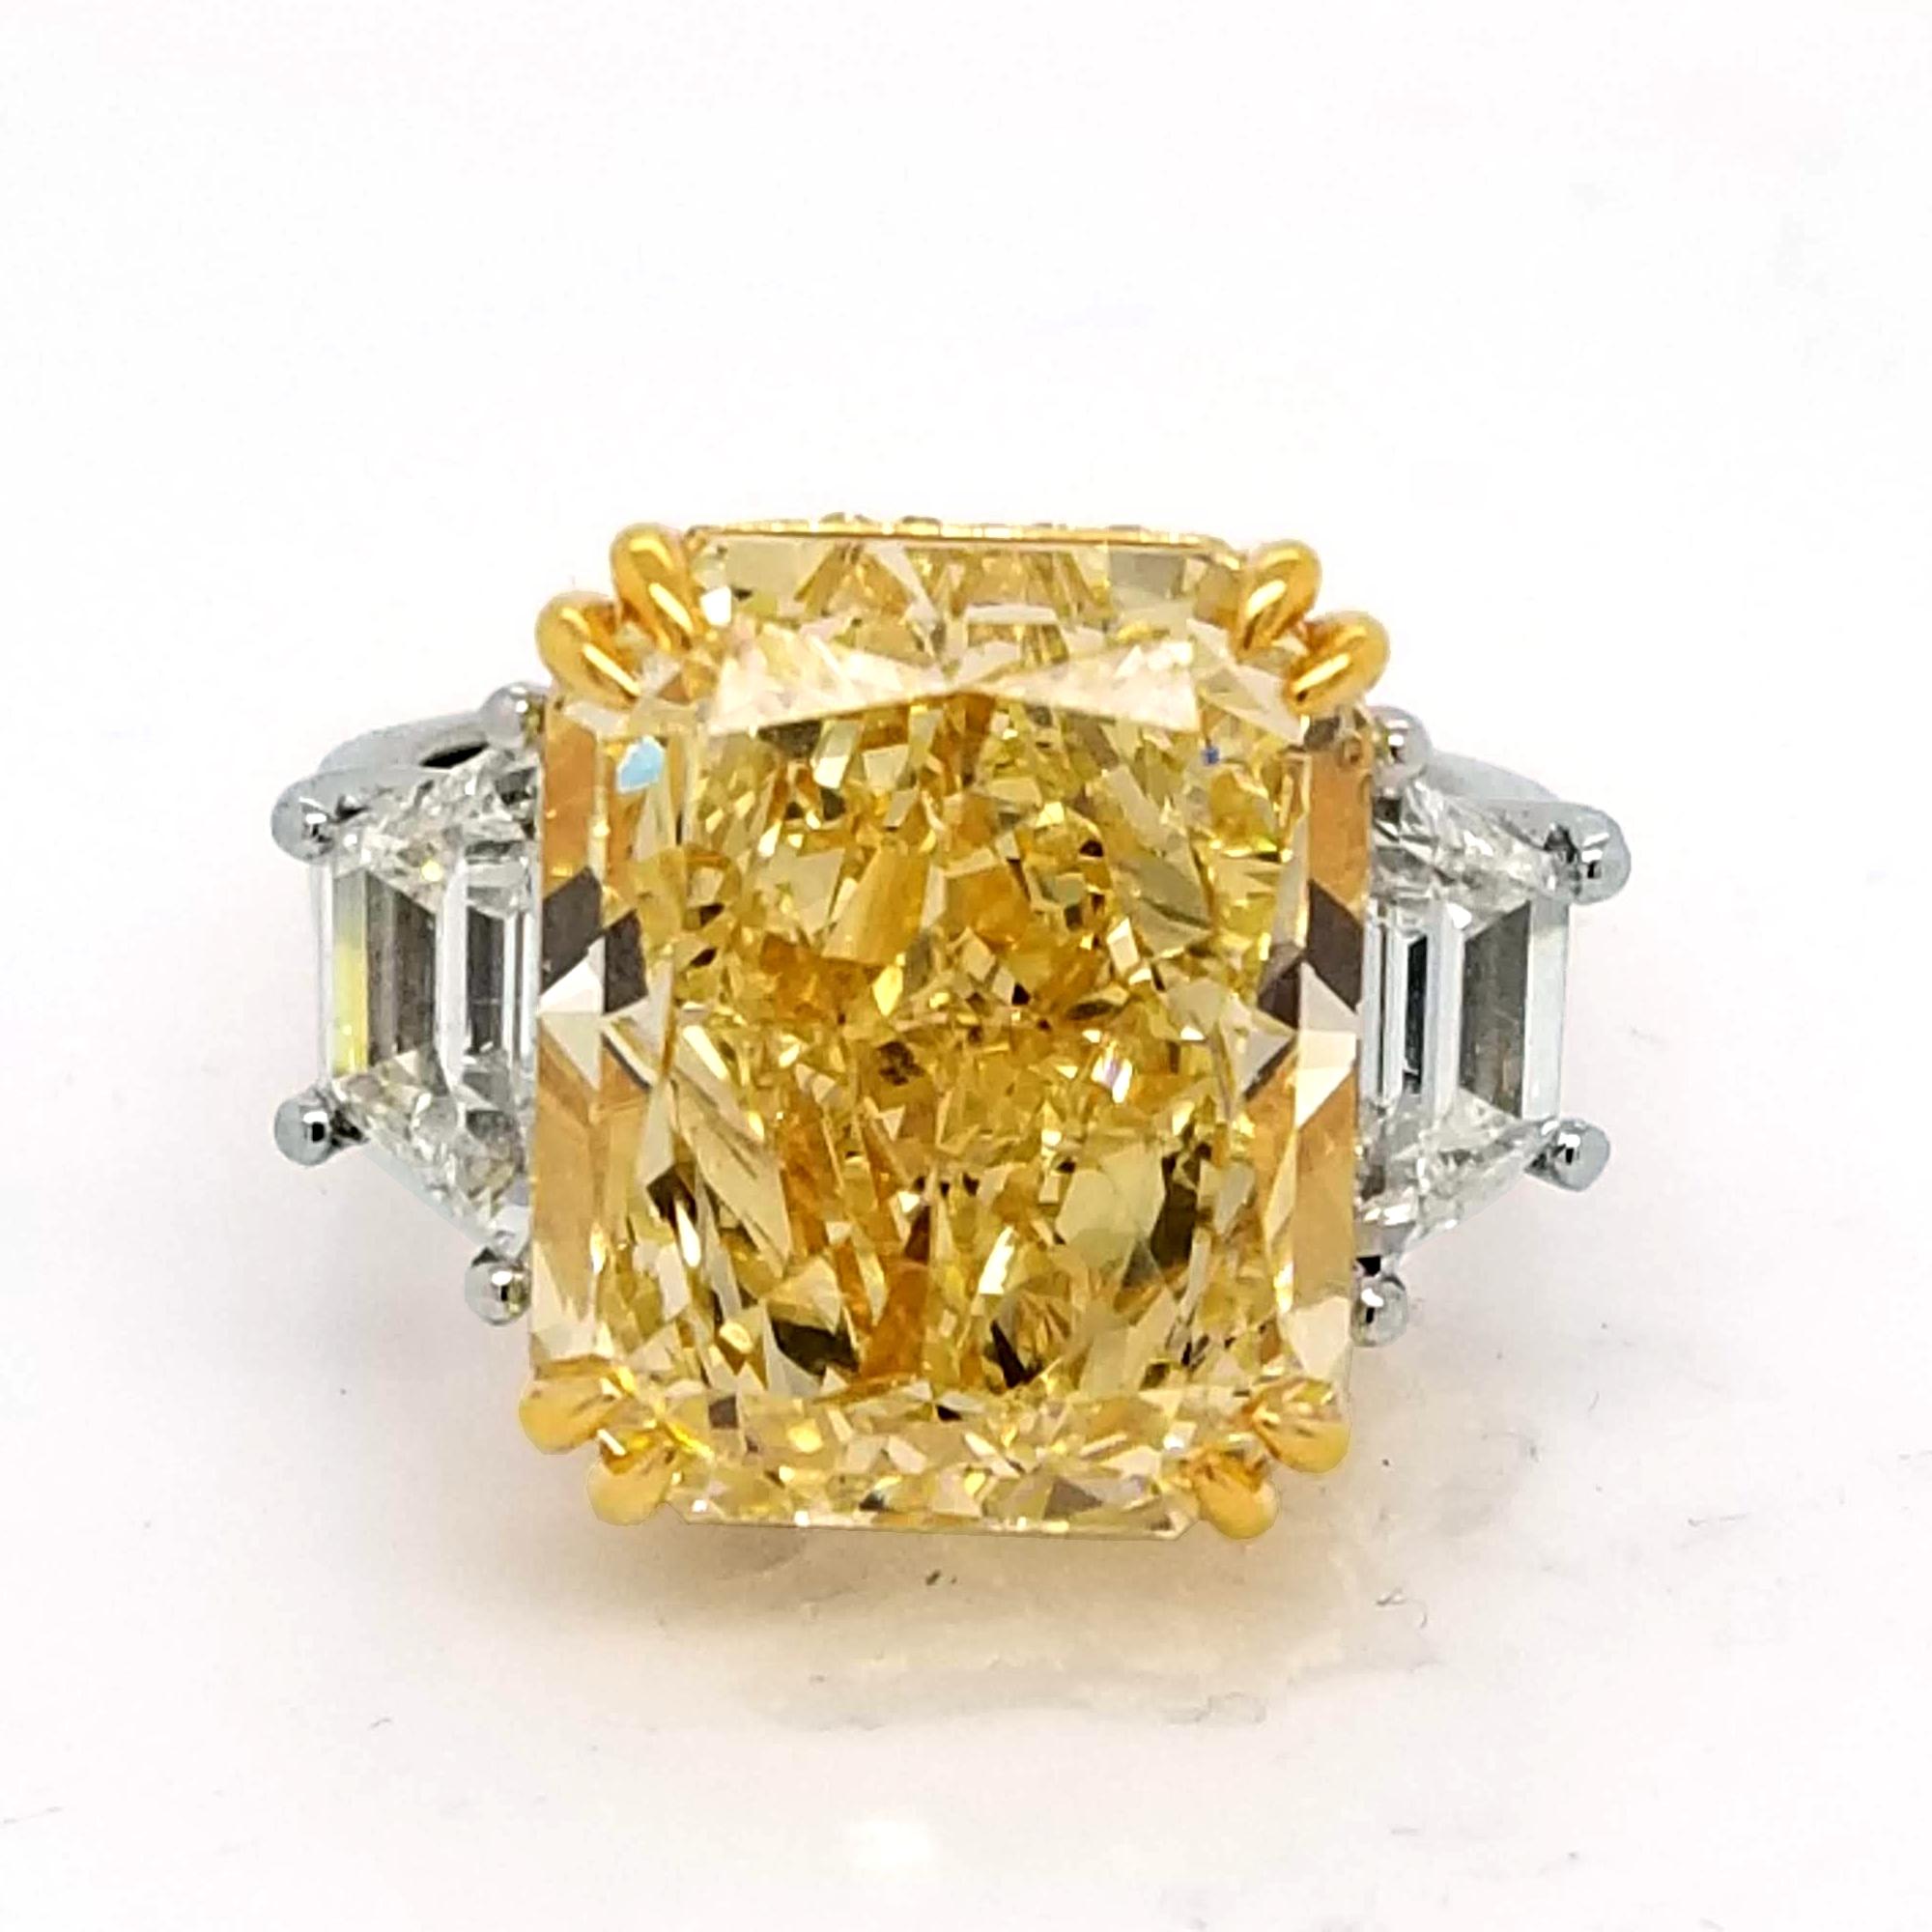 A beautiful Elongated Radiant Natural Fancy Yellow SI2 GIA certified center Diamond set in a fine Platinum with 18k Yellow gold accent 3 Stone Ring with 2 Trapezoid Cut diamonds on the side (1.31 Ct). The side of the cup is pave set with 98 pieces